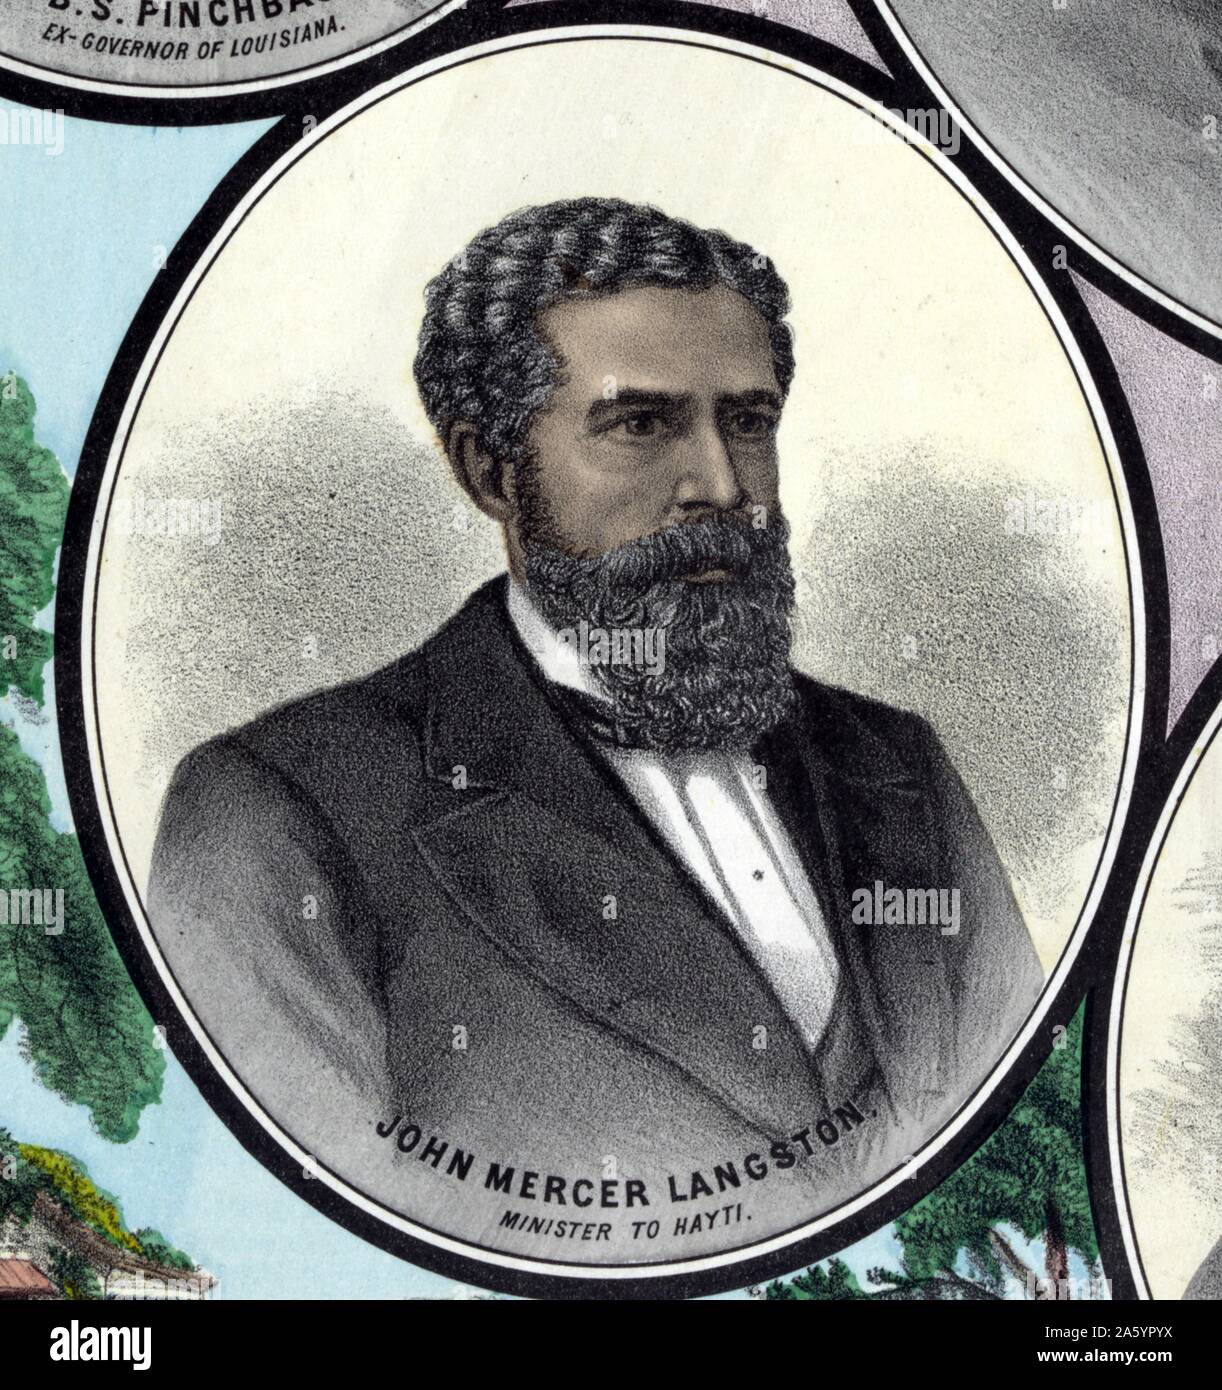 John Mercer Langston (December 14, 1829 – November 15, 1897) was an American abolitionist, attorney, educator, activist and politician. He was the first dean of the law school at Howard University Stock Photo